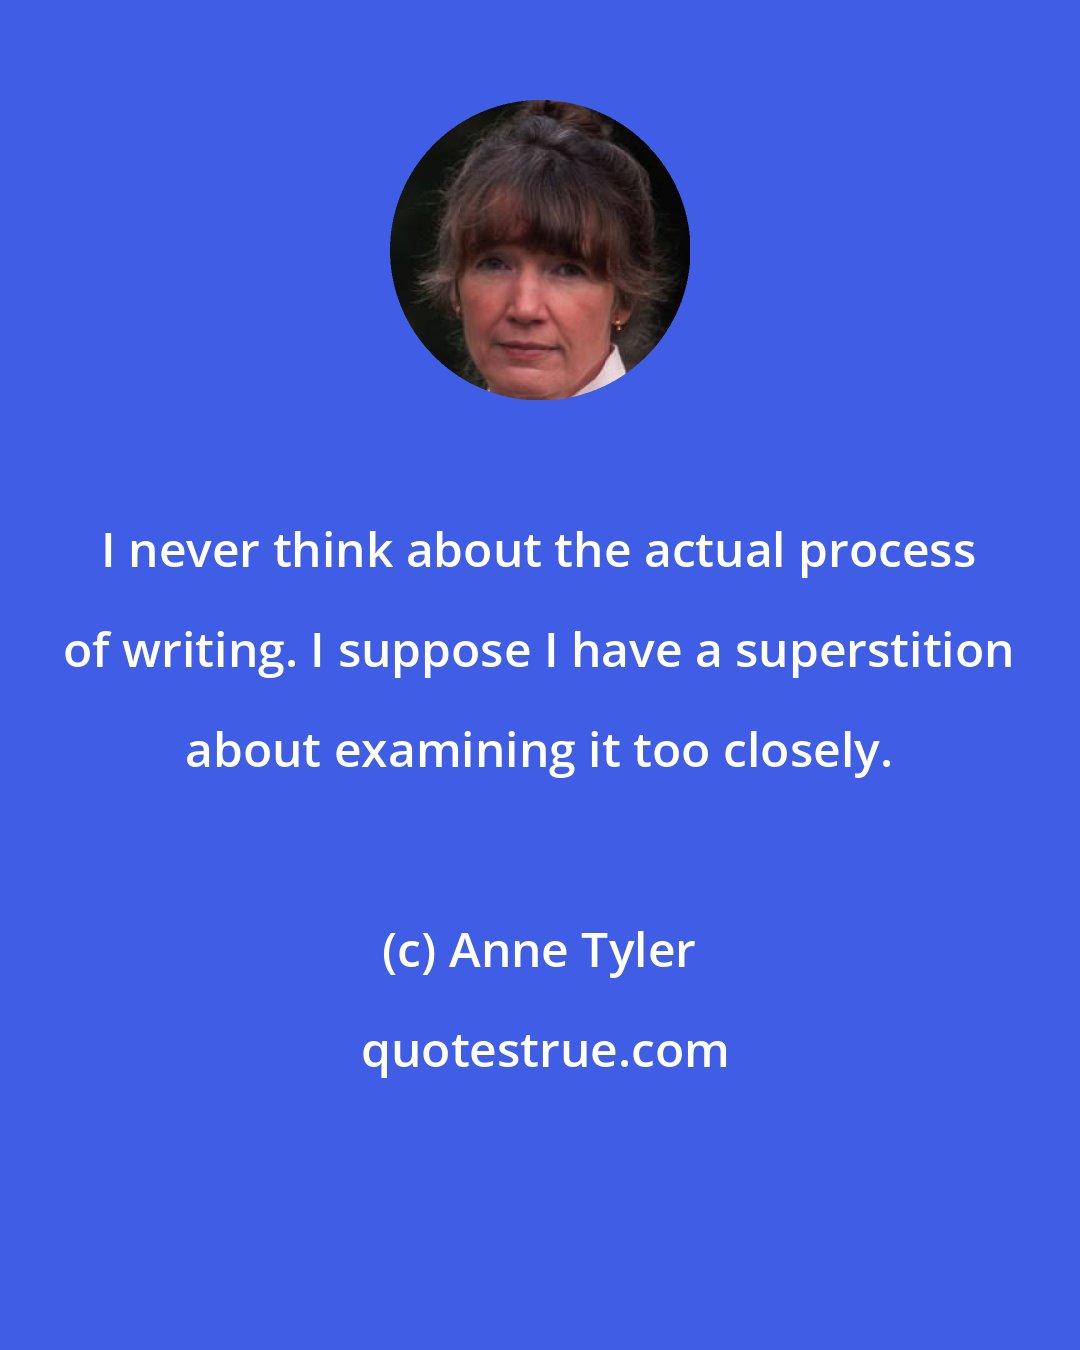 Anne Tyler: I never think about the actual process of writing. I suppose I have a superstition about examining it too closely.